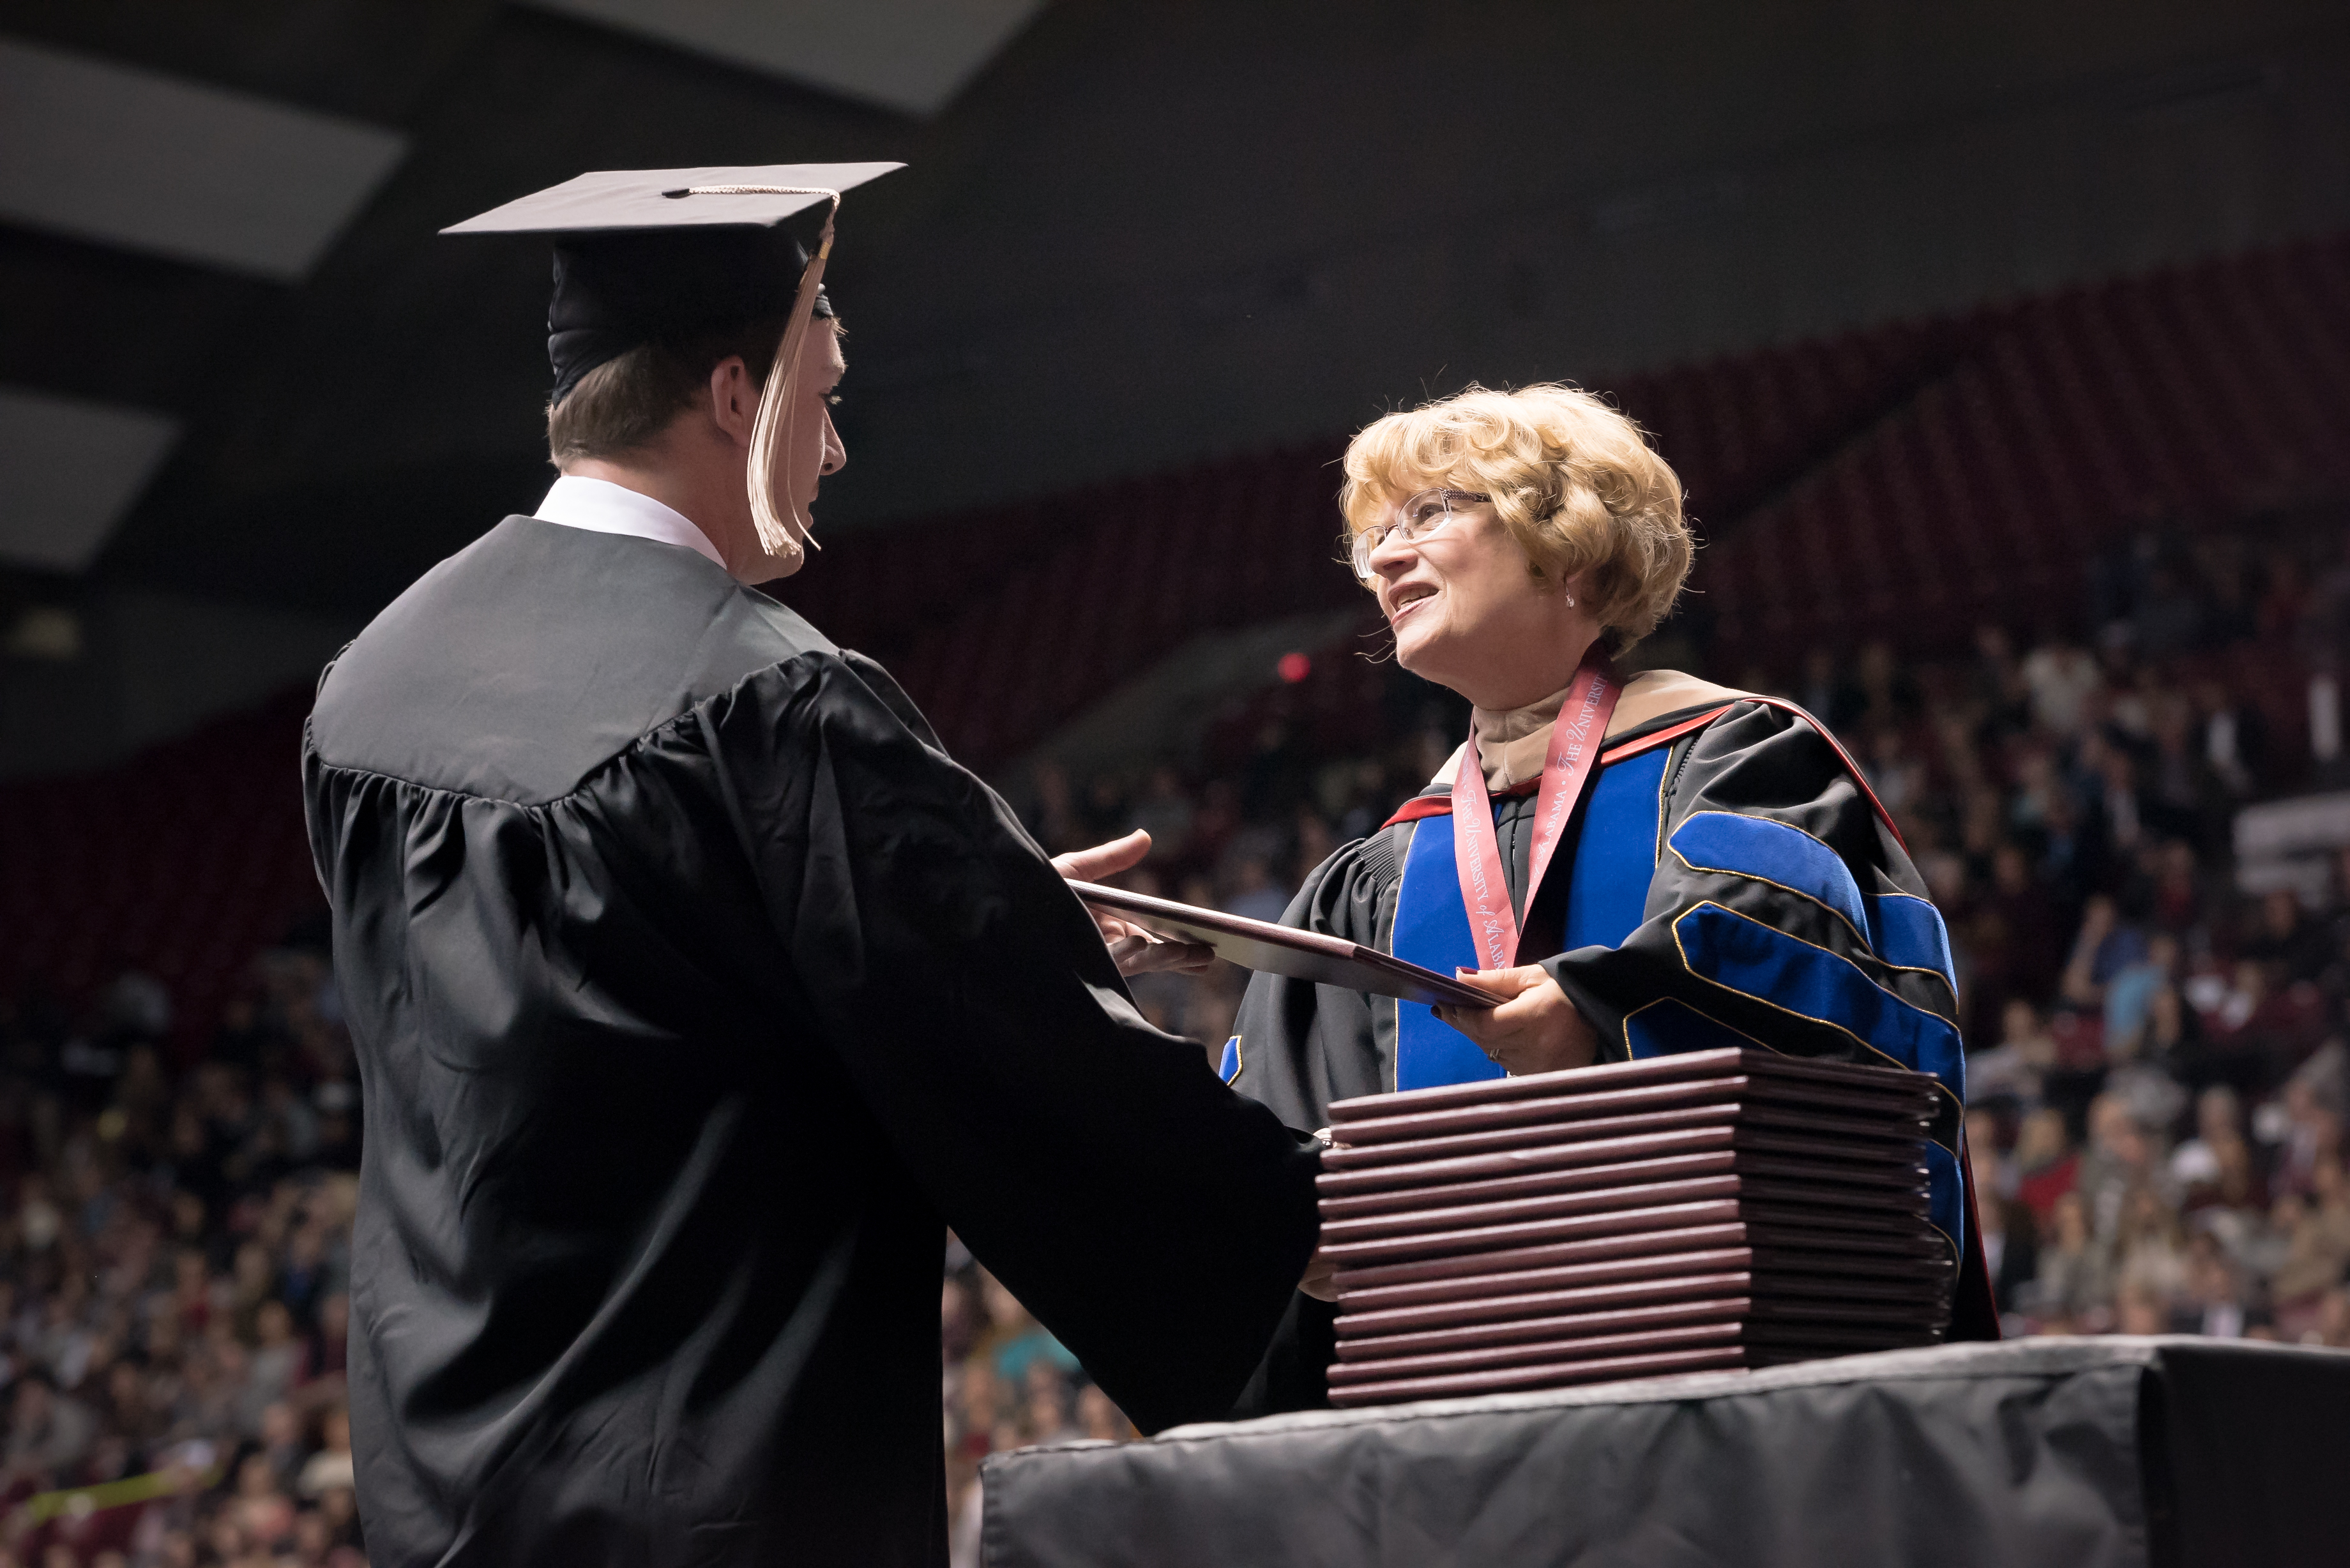 Dean Palan hands a degree to a student at graduation